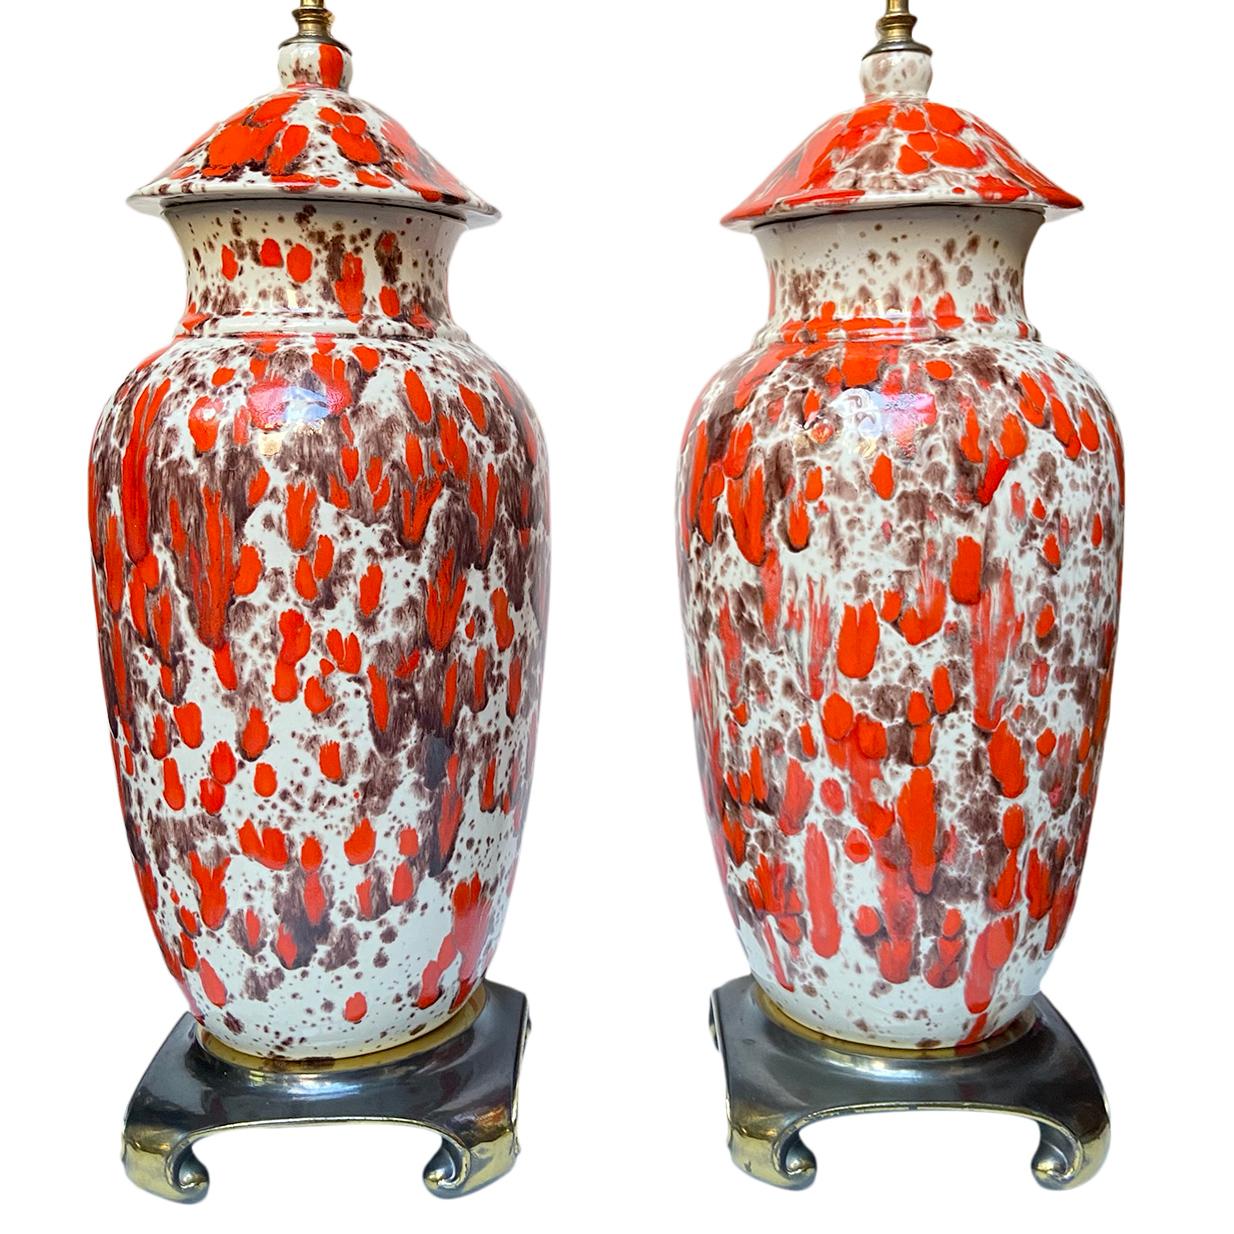 Pair of circa 1950s Italian porcelain drip-glazed porcelain table lamps with bronze bases.

Measurements:
Height of body: 18.5